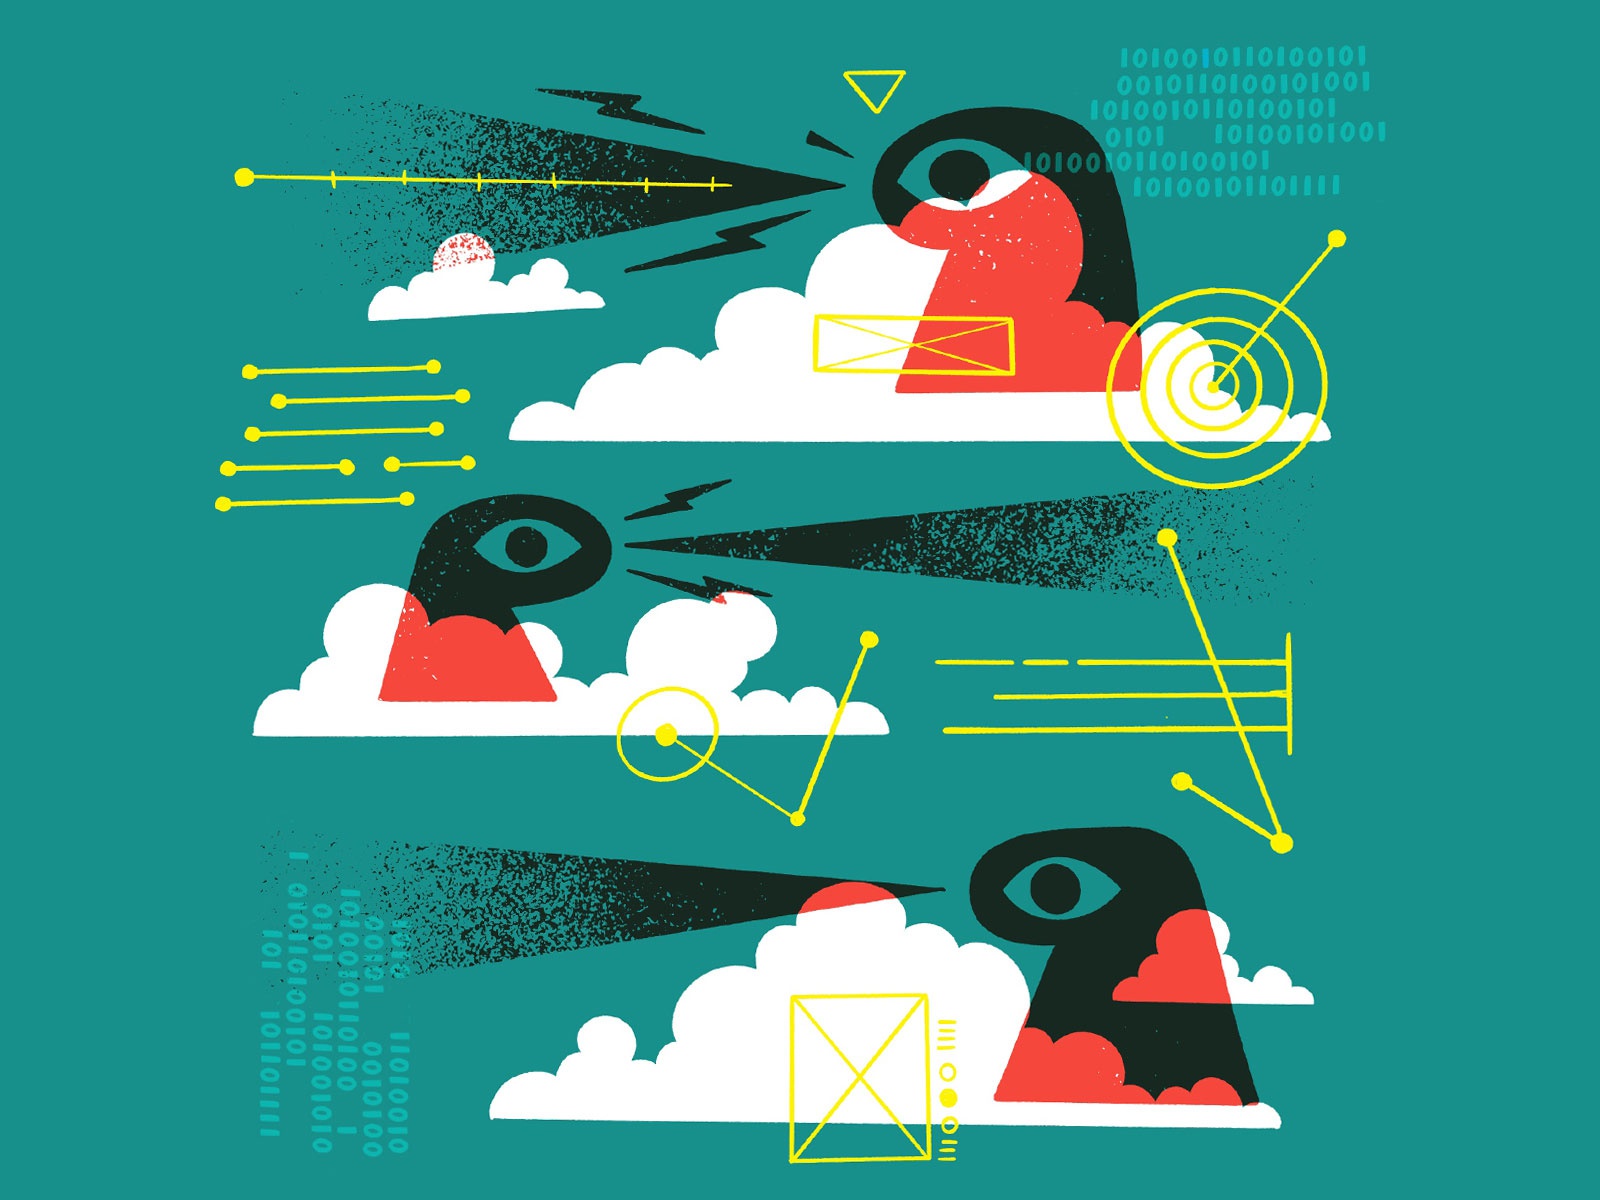 Big Brother is Watching by Jetpacks and Rollerskates on Dribbble.